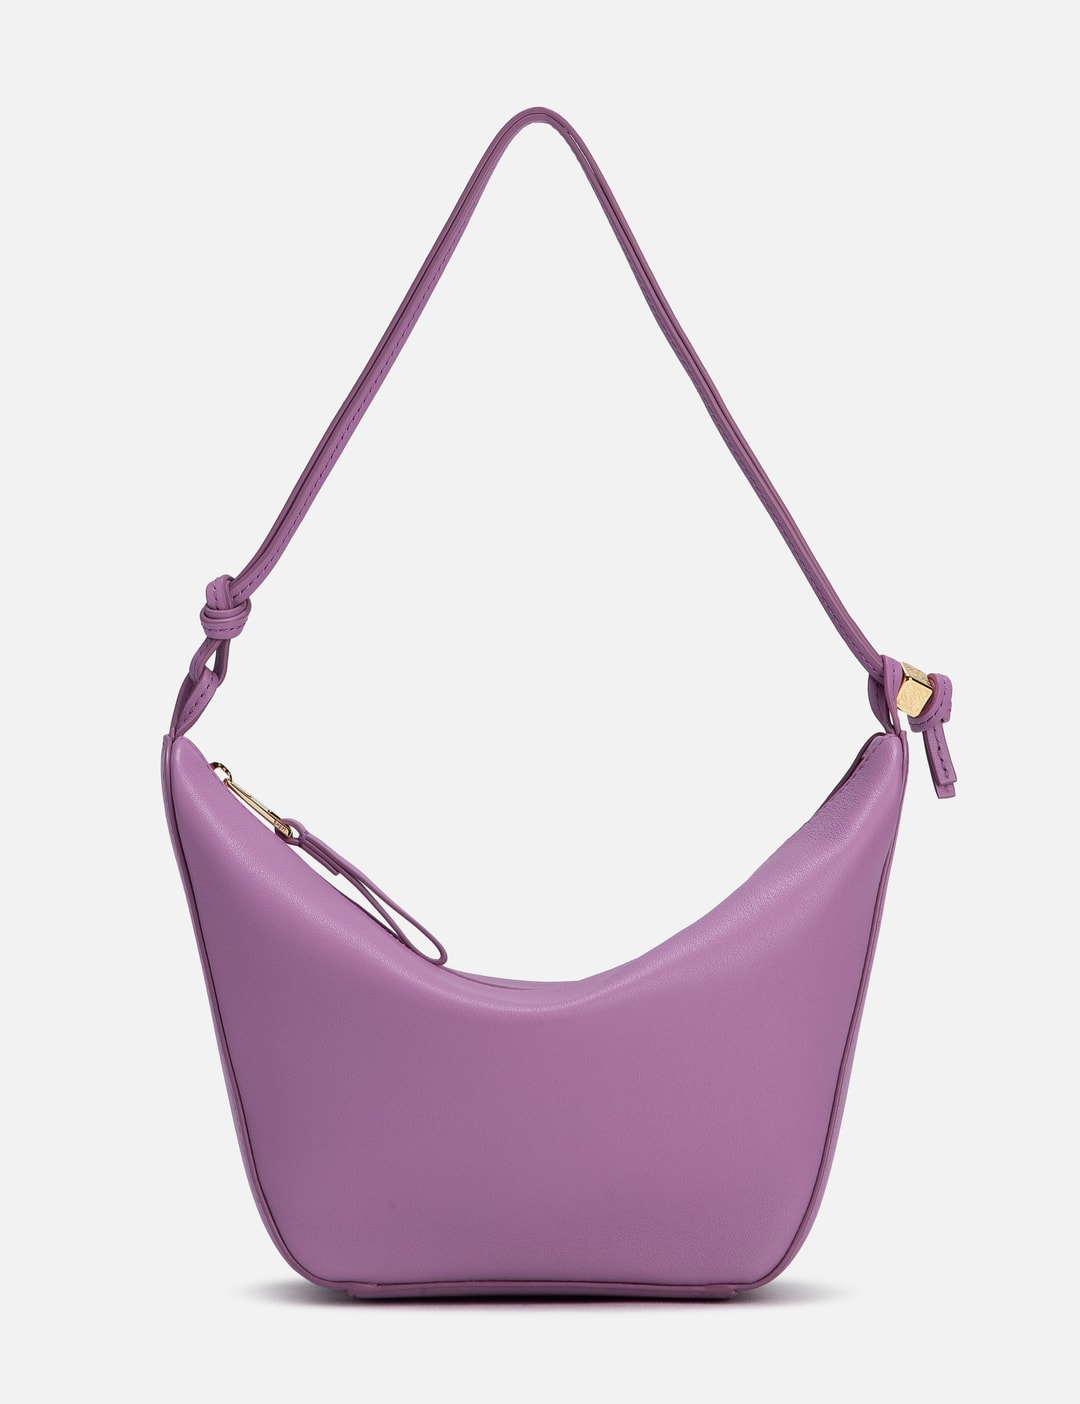 LOEWE Puzzle Hobo Bag in Nappa Calfskin Bright Purple in Calfskin Leather  with Gold-tone - US